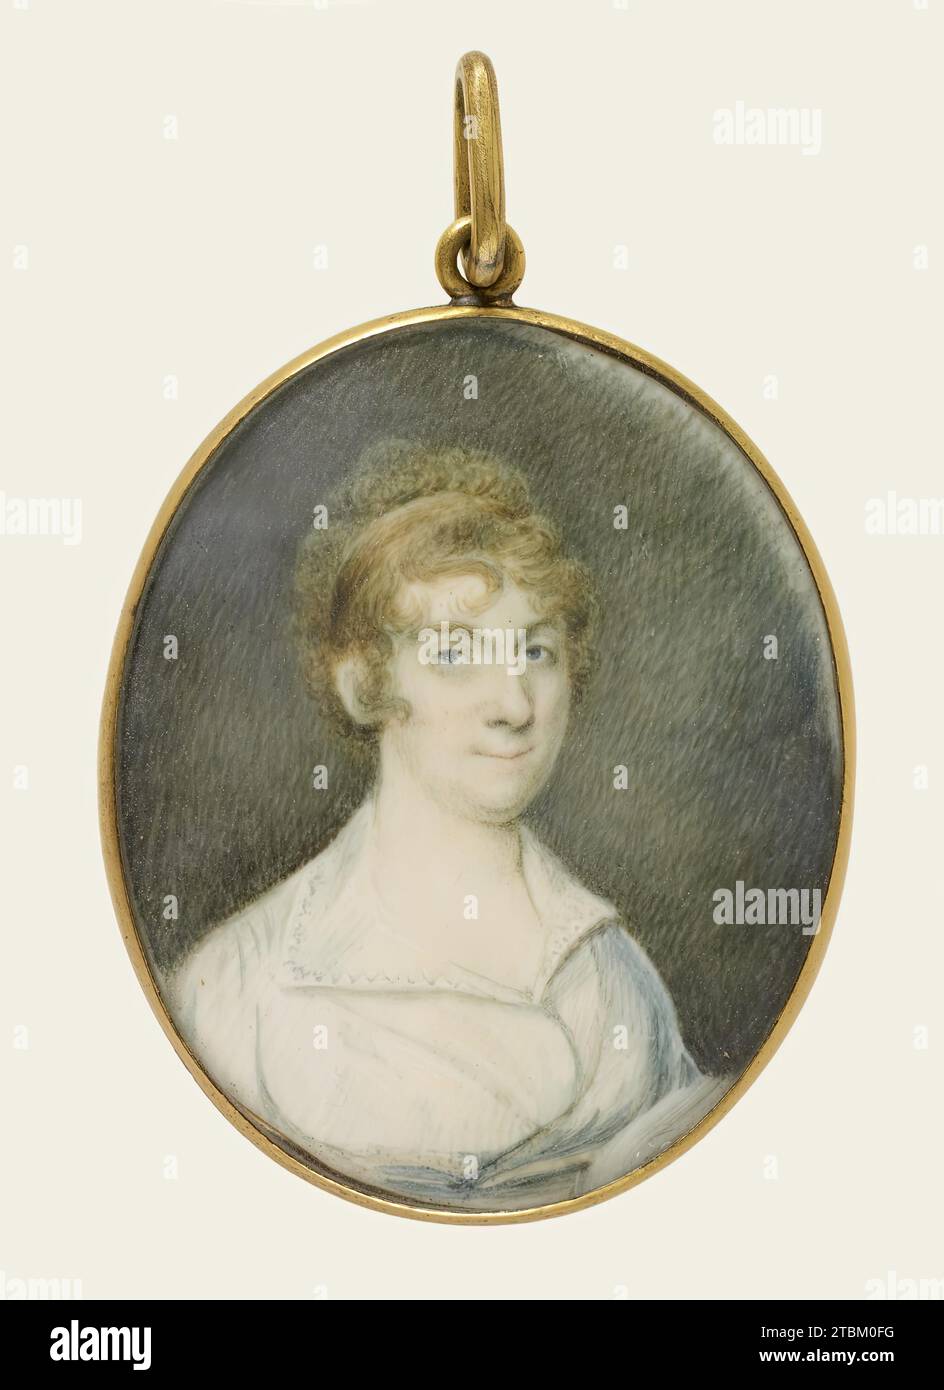 Ann Brunton, the actress (Mrs. Rob Merry), c1795. Ann Brunton (1769-1808) was the first actress of eminence to cross the Atlantic. She acted first in Bath and London where she attained great distinction, and was rated by many as second only to Mrs. Siddons. In 1792 she married Robert Merry, a socially advantageous match, although her husband, who was an amateur playwright, had soon spent all of his inheritance. She retired from the theatre after her marriage, and the couple lived in Paris, but financial constraints meant that she had to return to the stage. The couple left for the United State Stock Photo